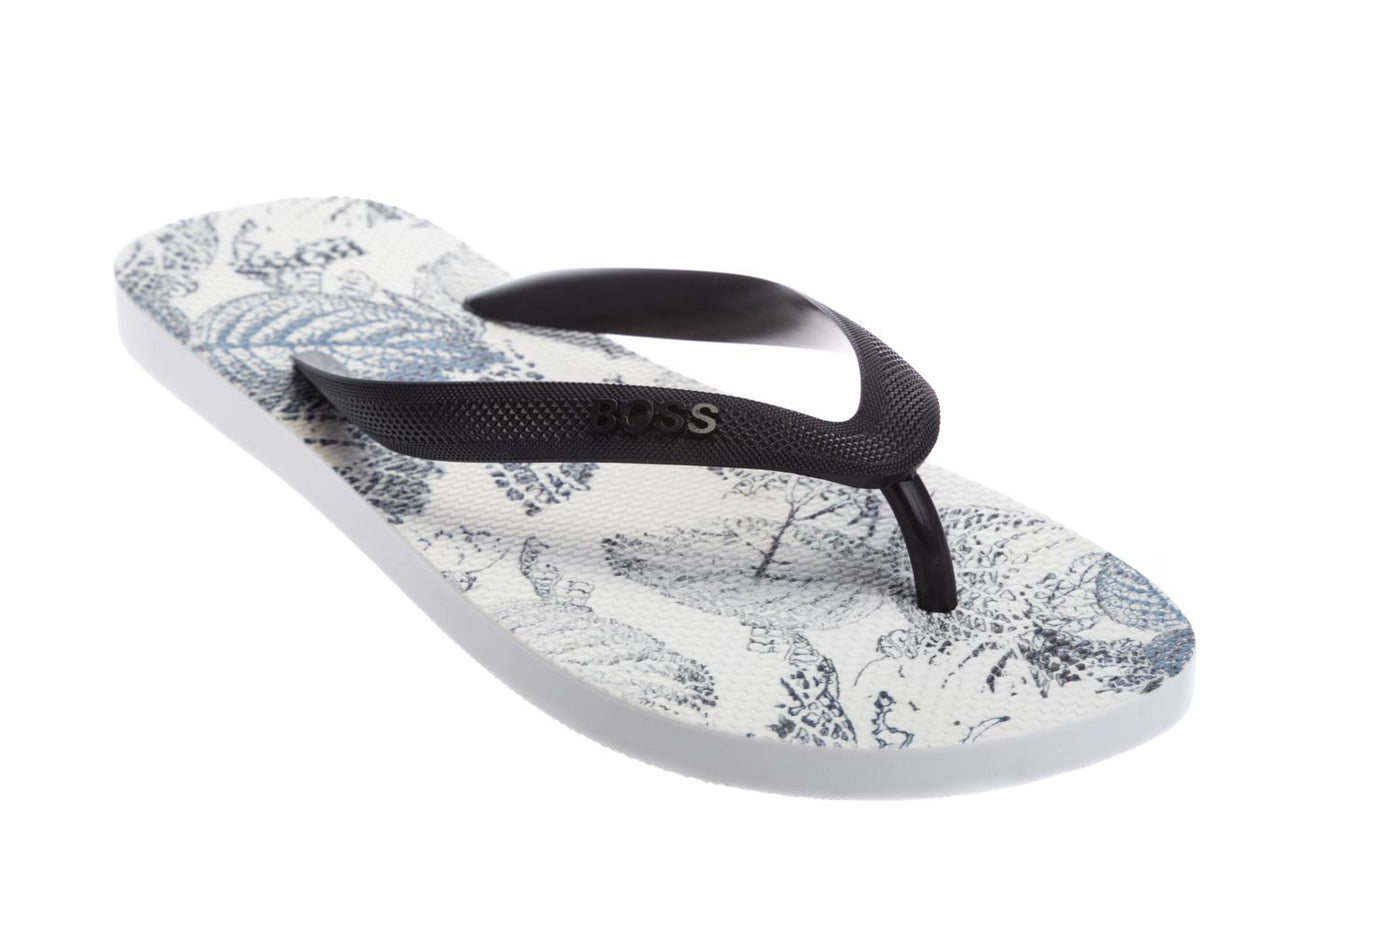 BOSS Pacific_THNG_BT Flip Flop in White Toe